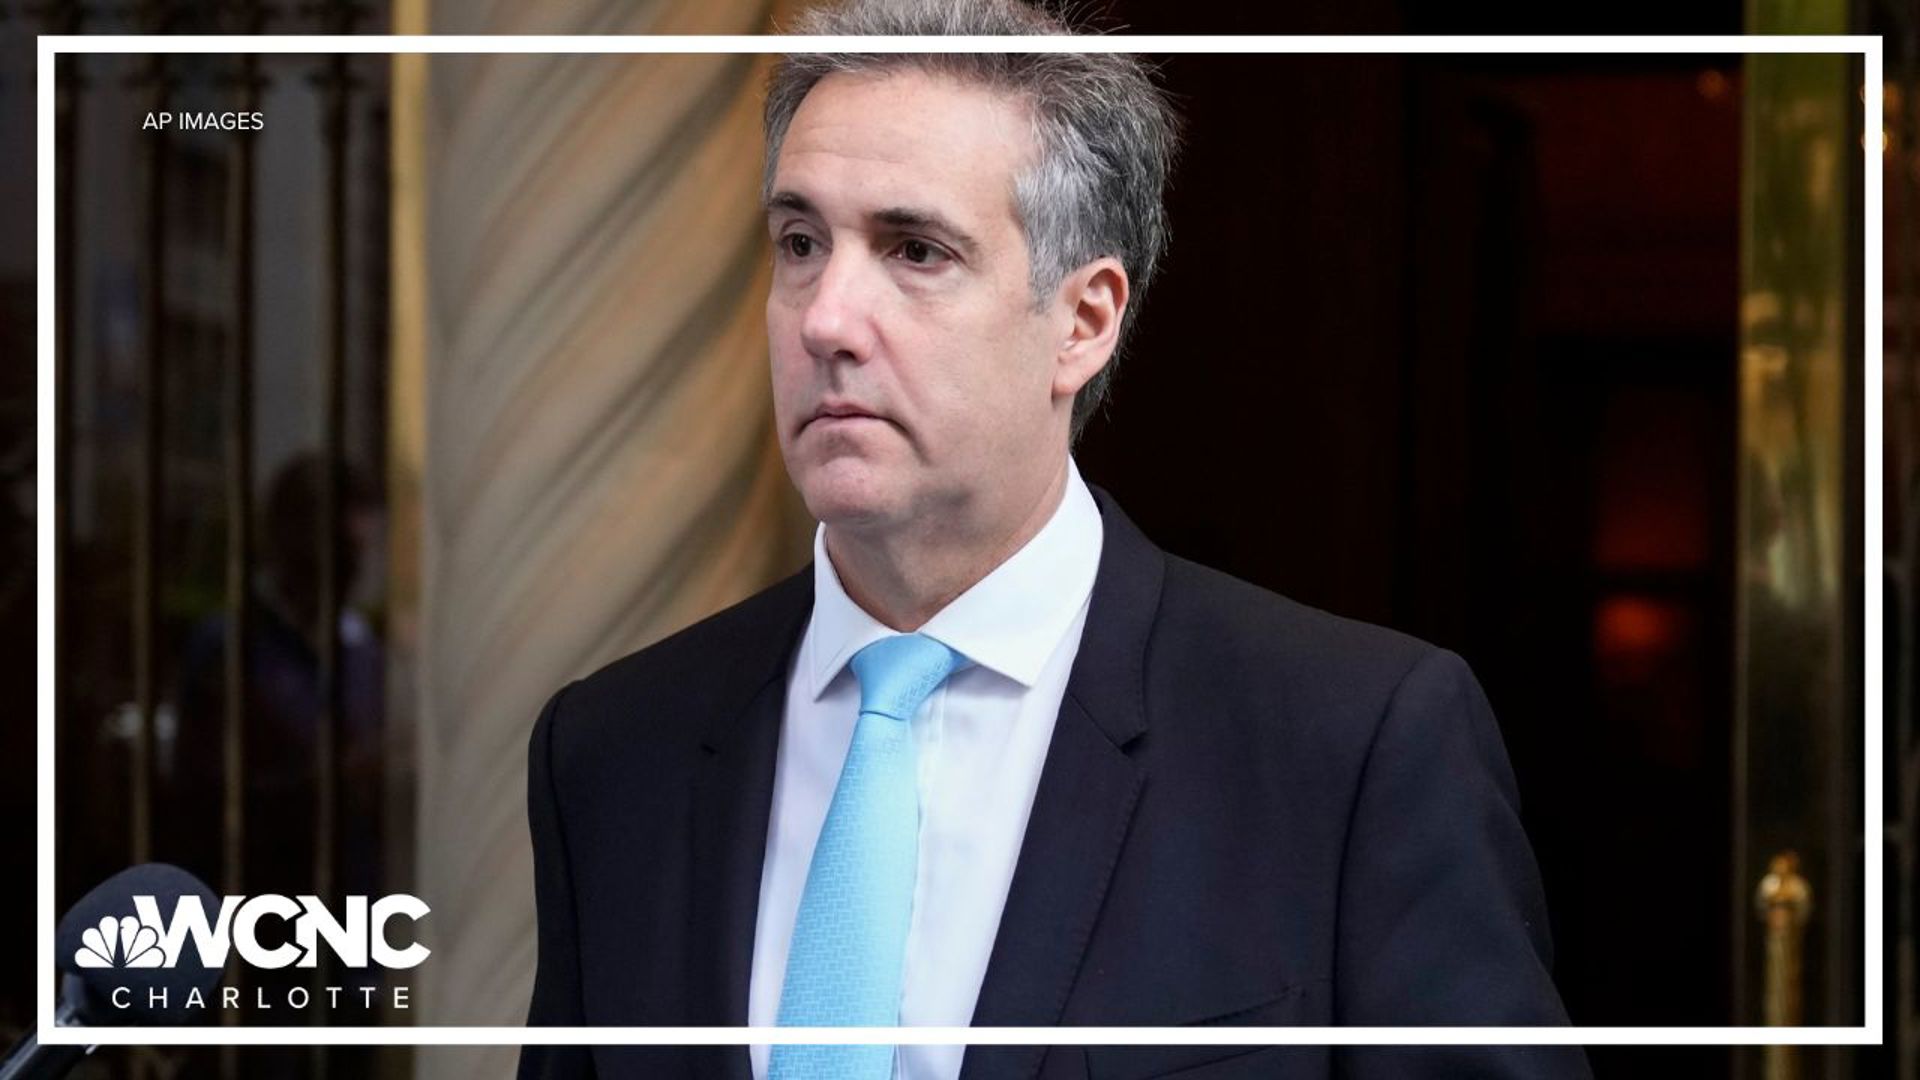 “Everything required Mr. Trump’s sign-off,” said Michael Cohen, Trump's fixer-turned-foe and the prosecution's star witness.